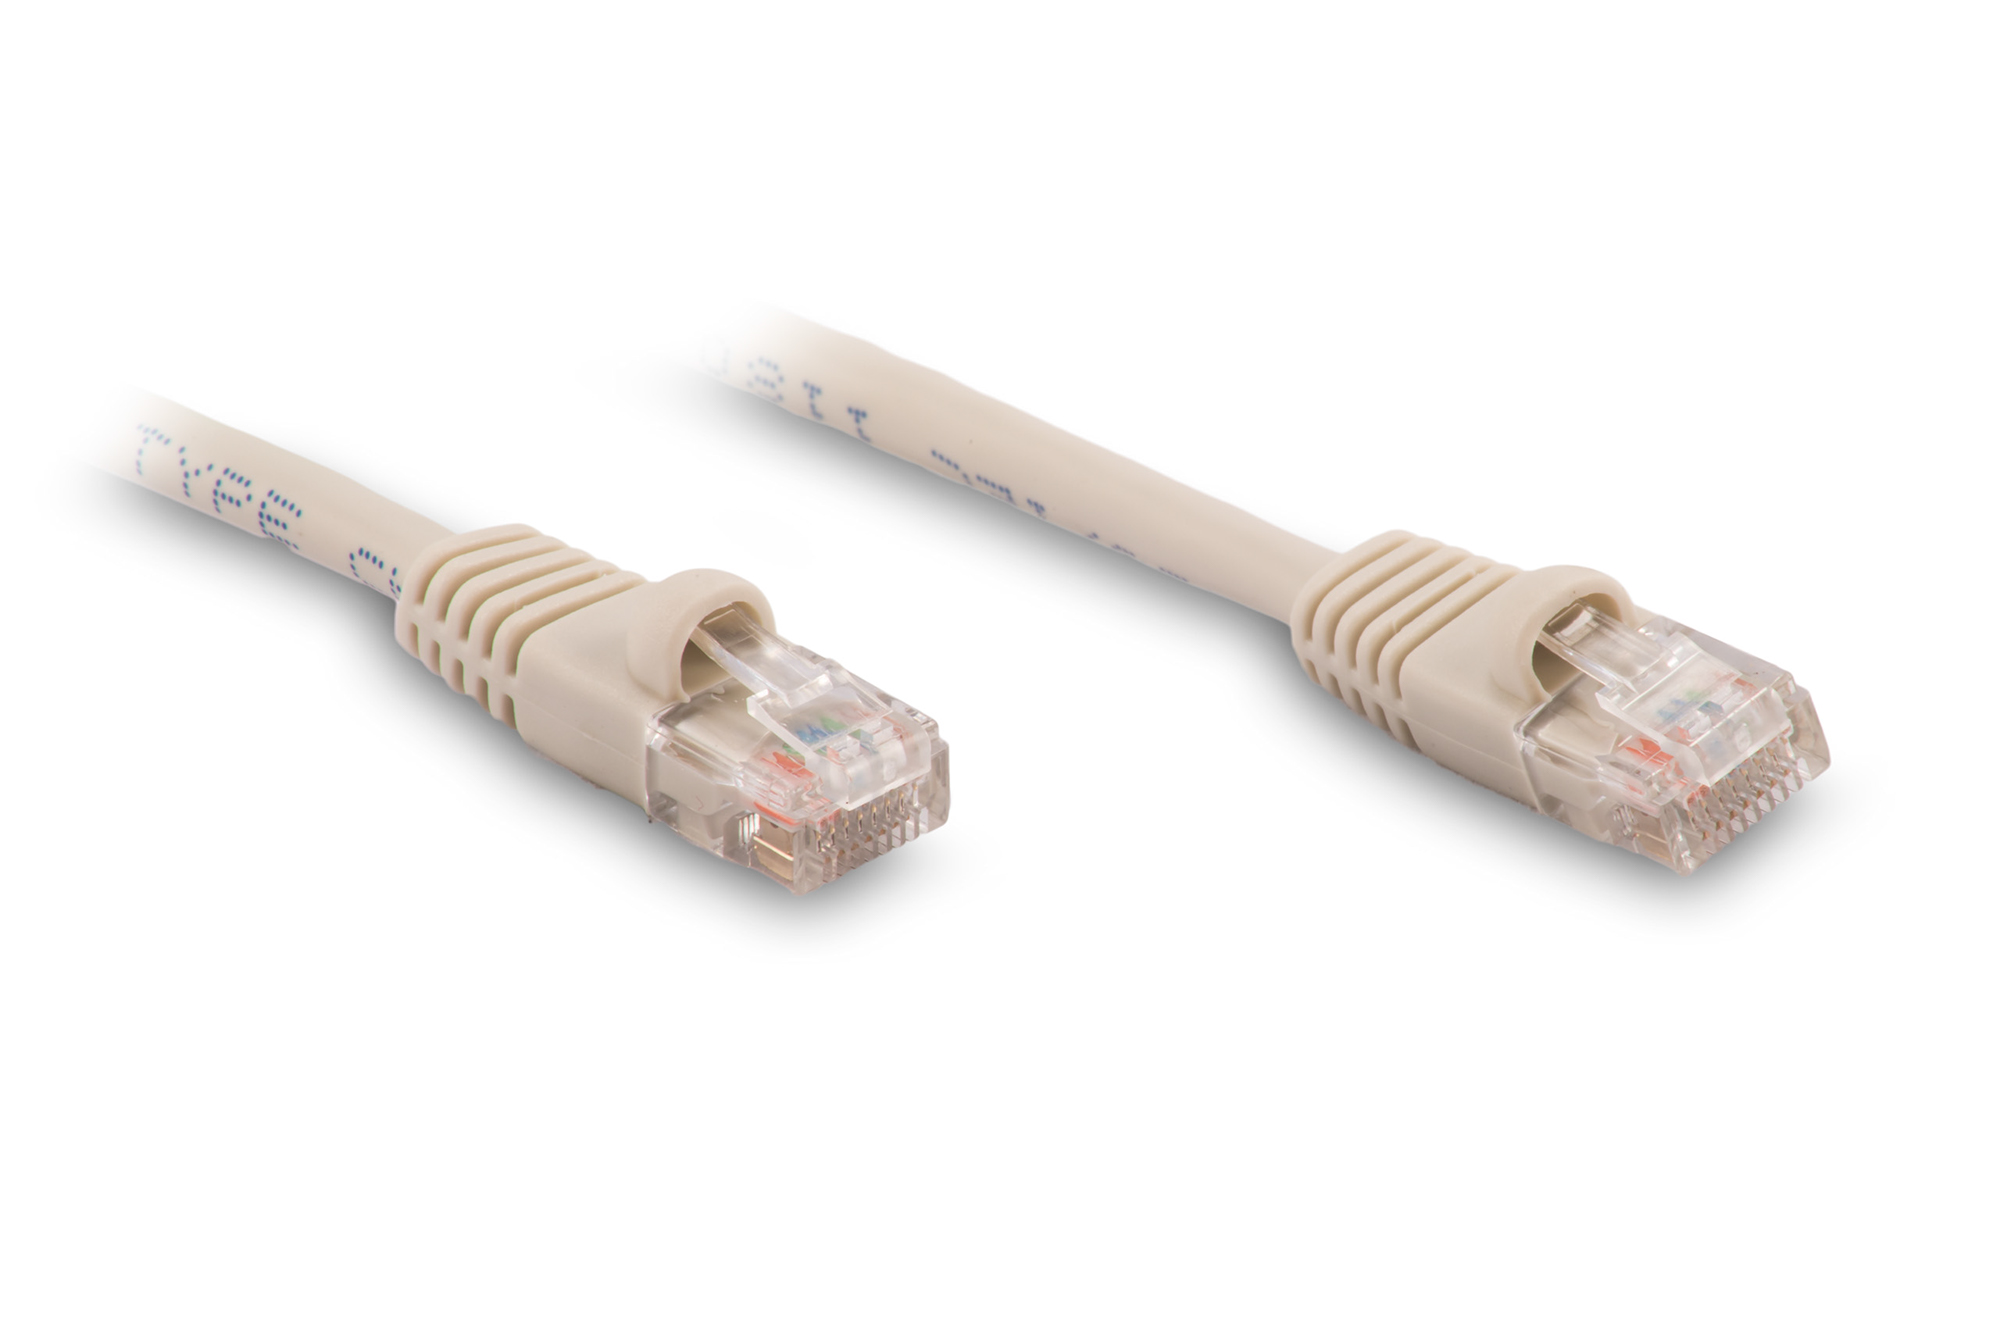 30ft Cat5e Ethernet Patch Cable - Gray Color - Snagless Boot